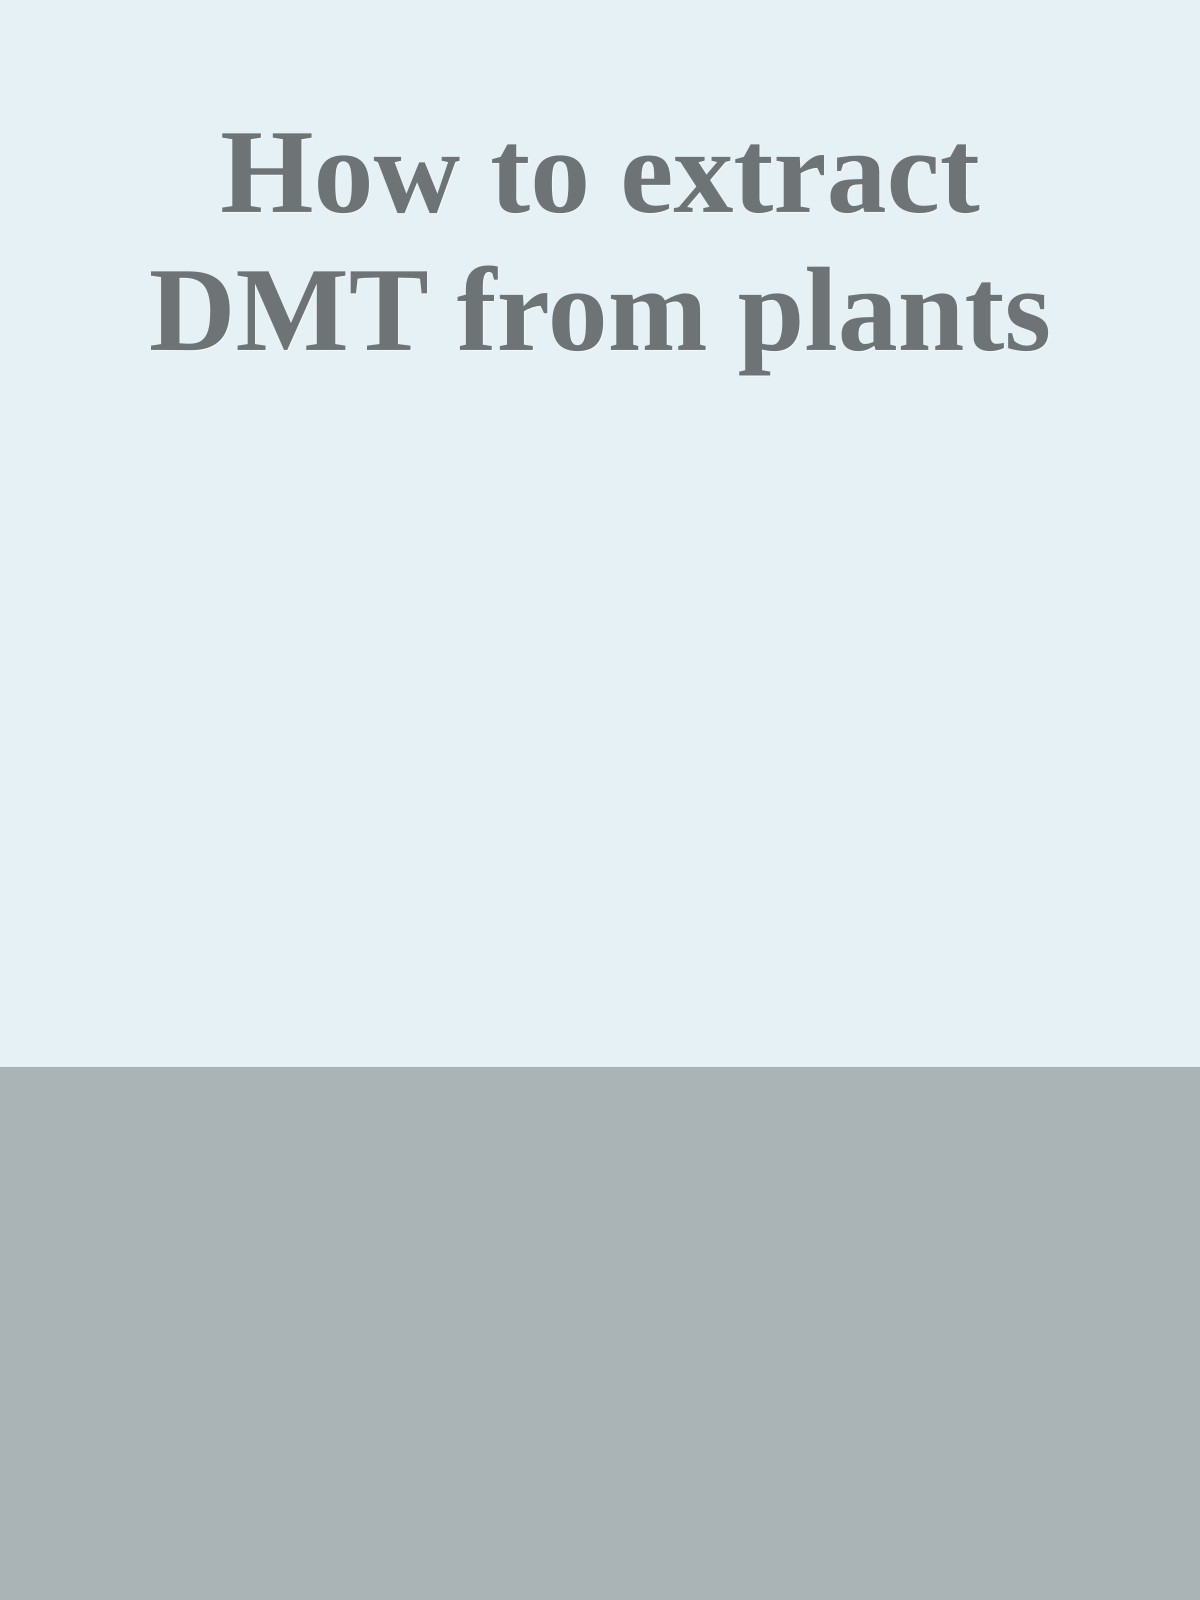 How to extract DMT from plants